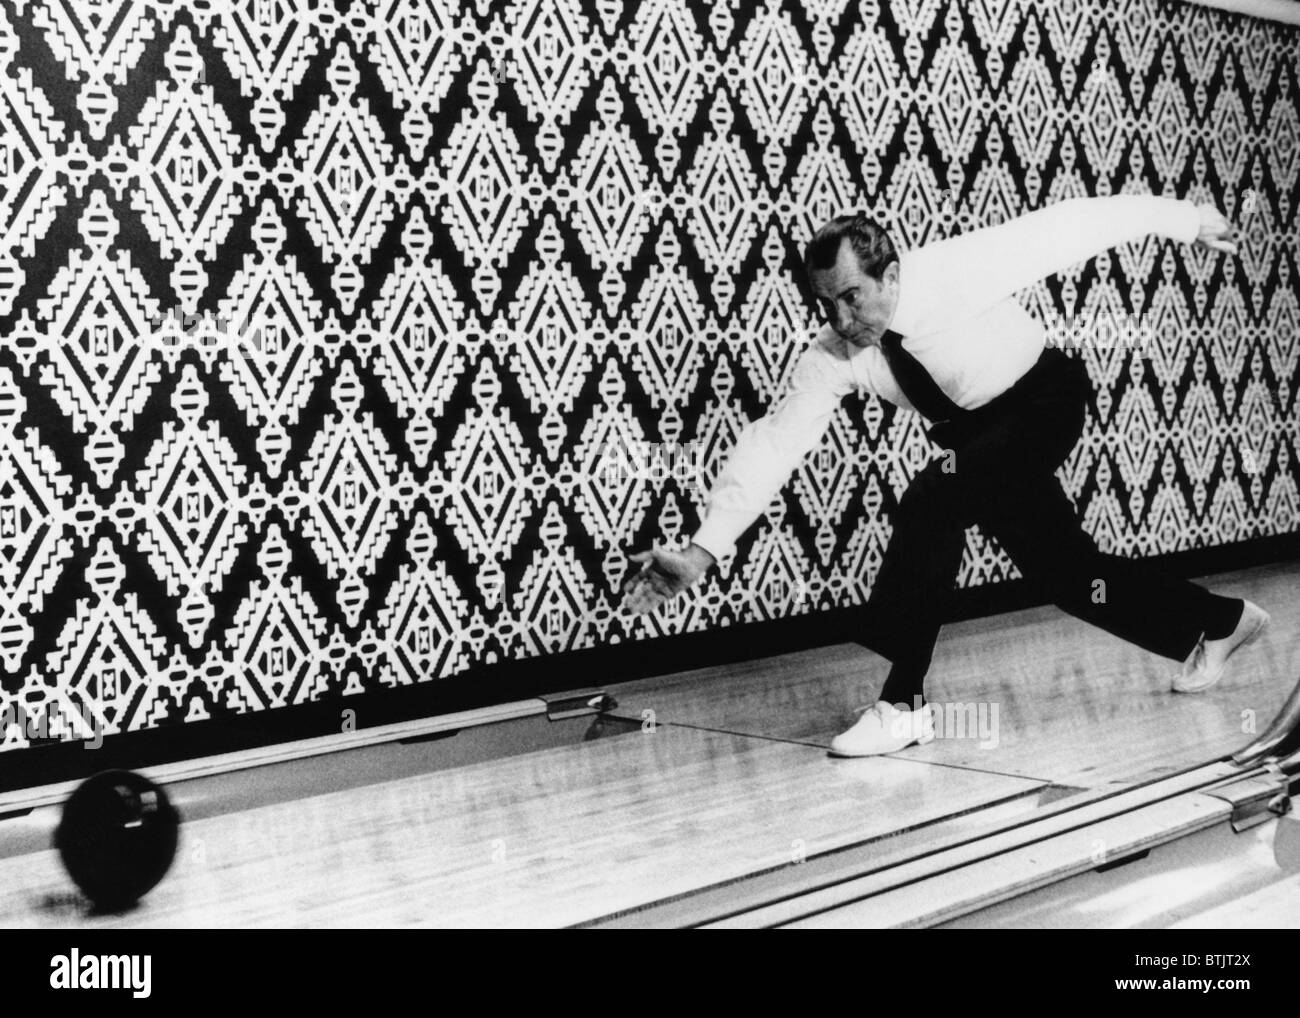 U.S. President Richard Nixon, bowling in the Executive Office Building located across from the White House, Washington D.C., 197 Stock Photo